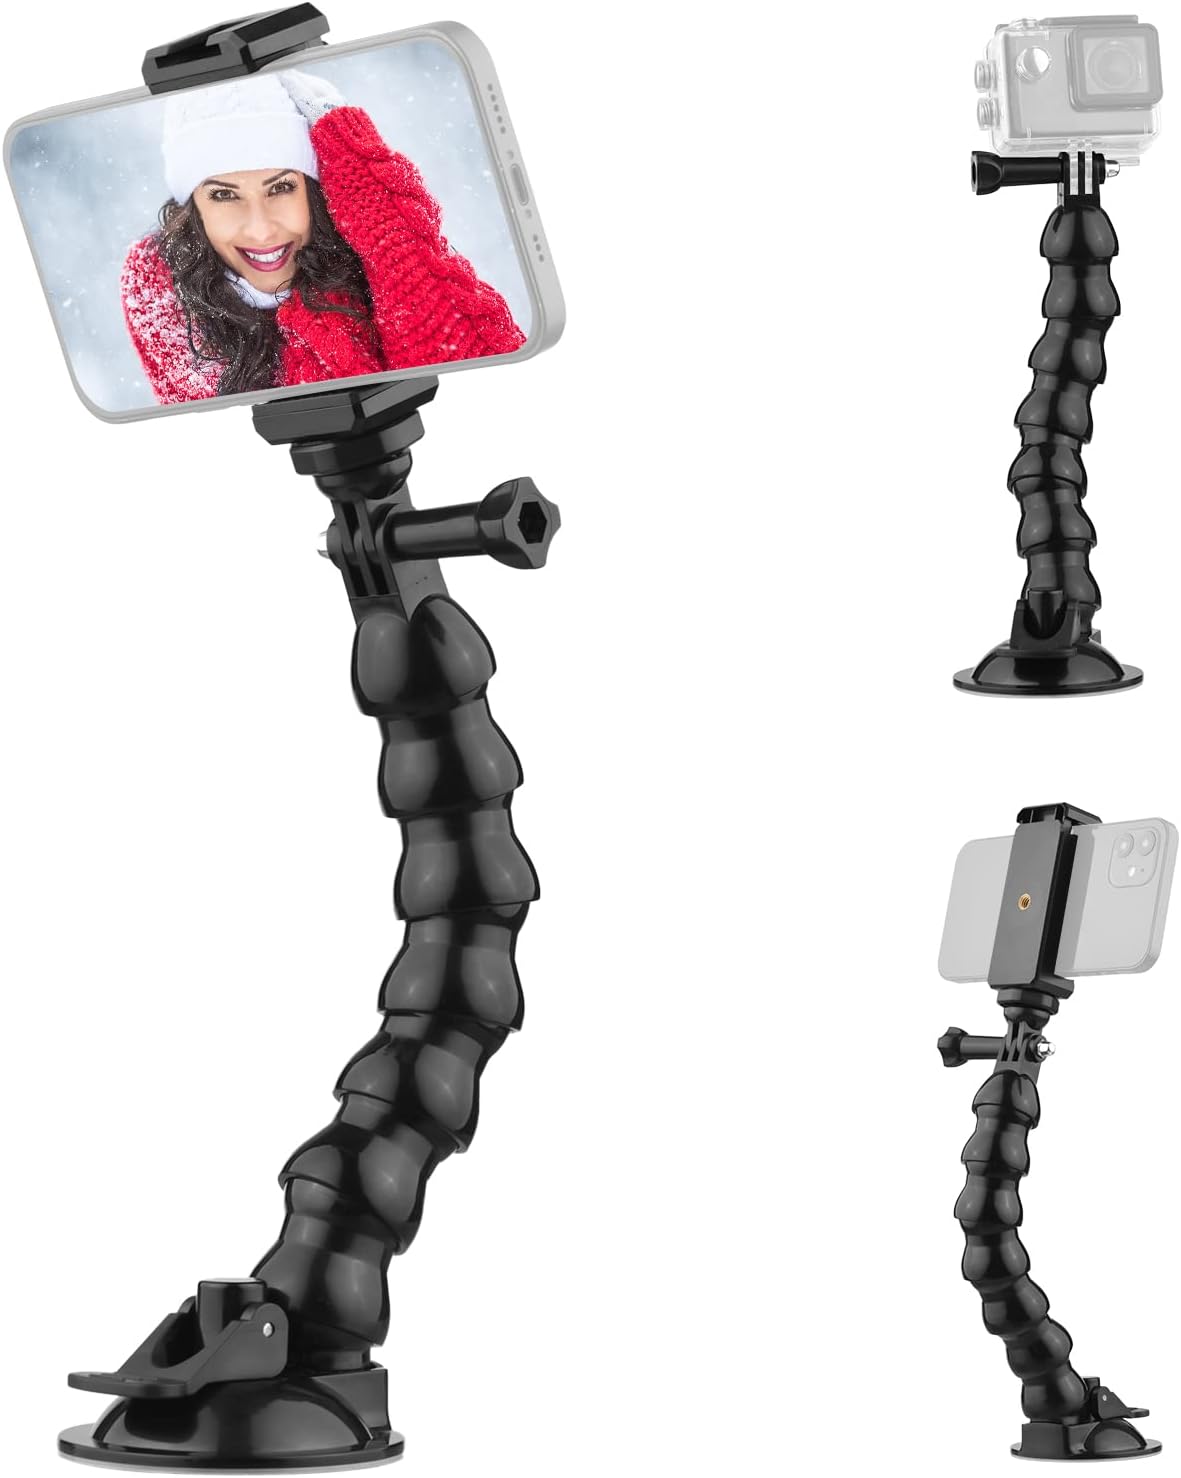 Flexible Suction Cup Mount Windshield Suction Cup Phone Mount Full angleRotatable